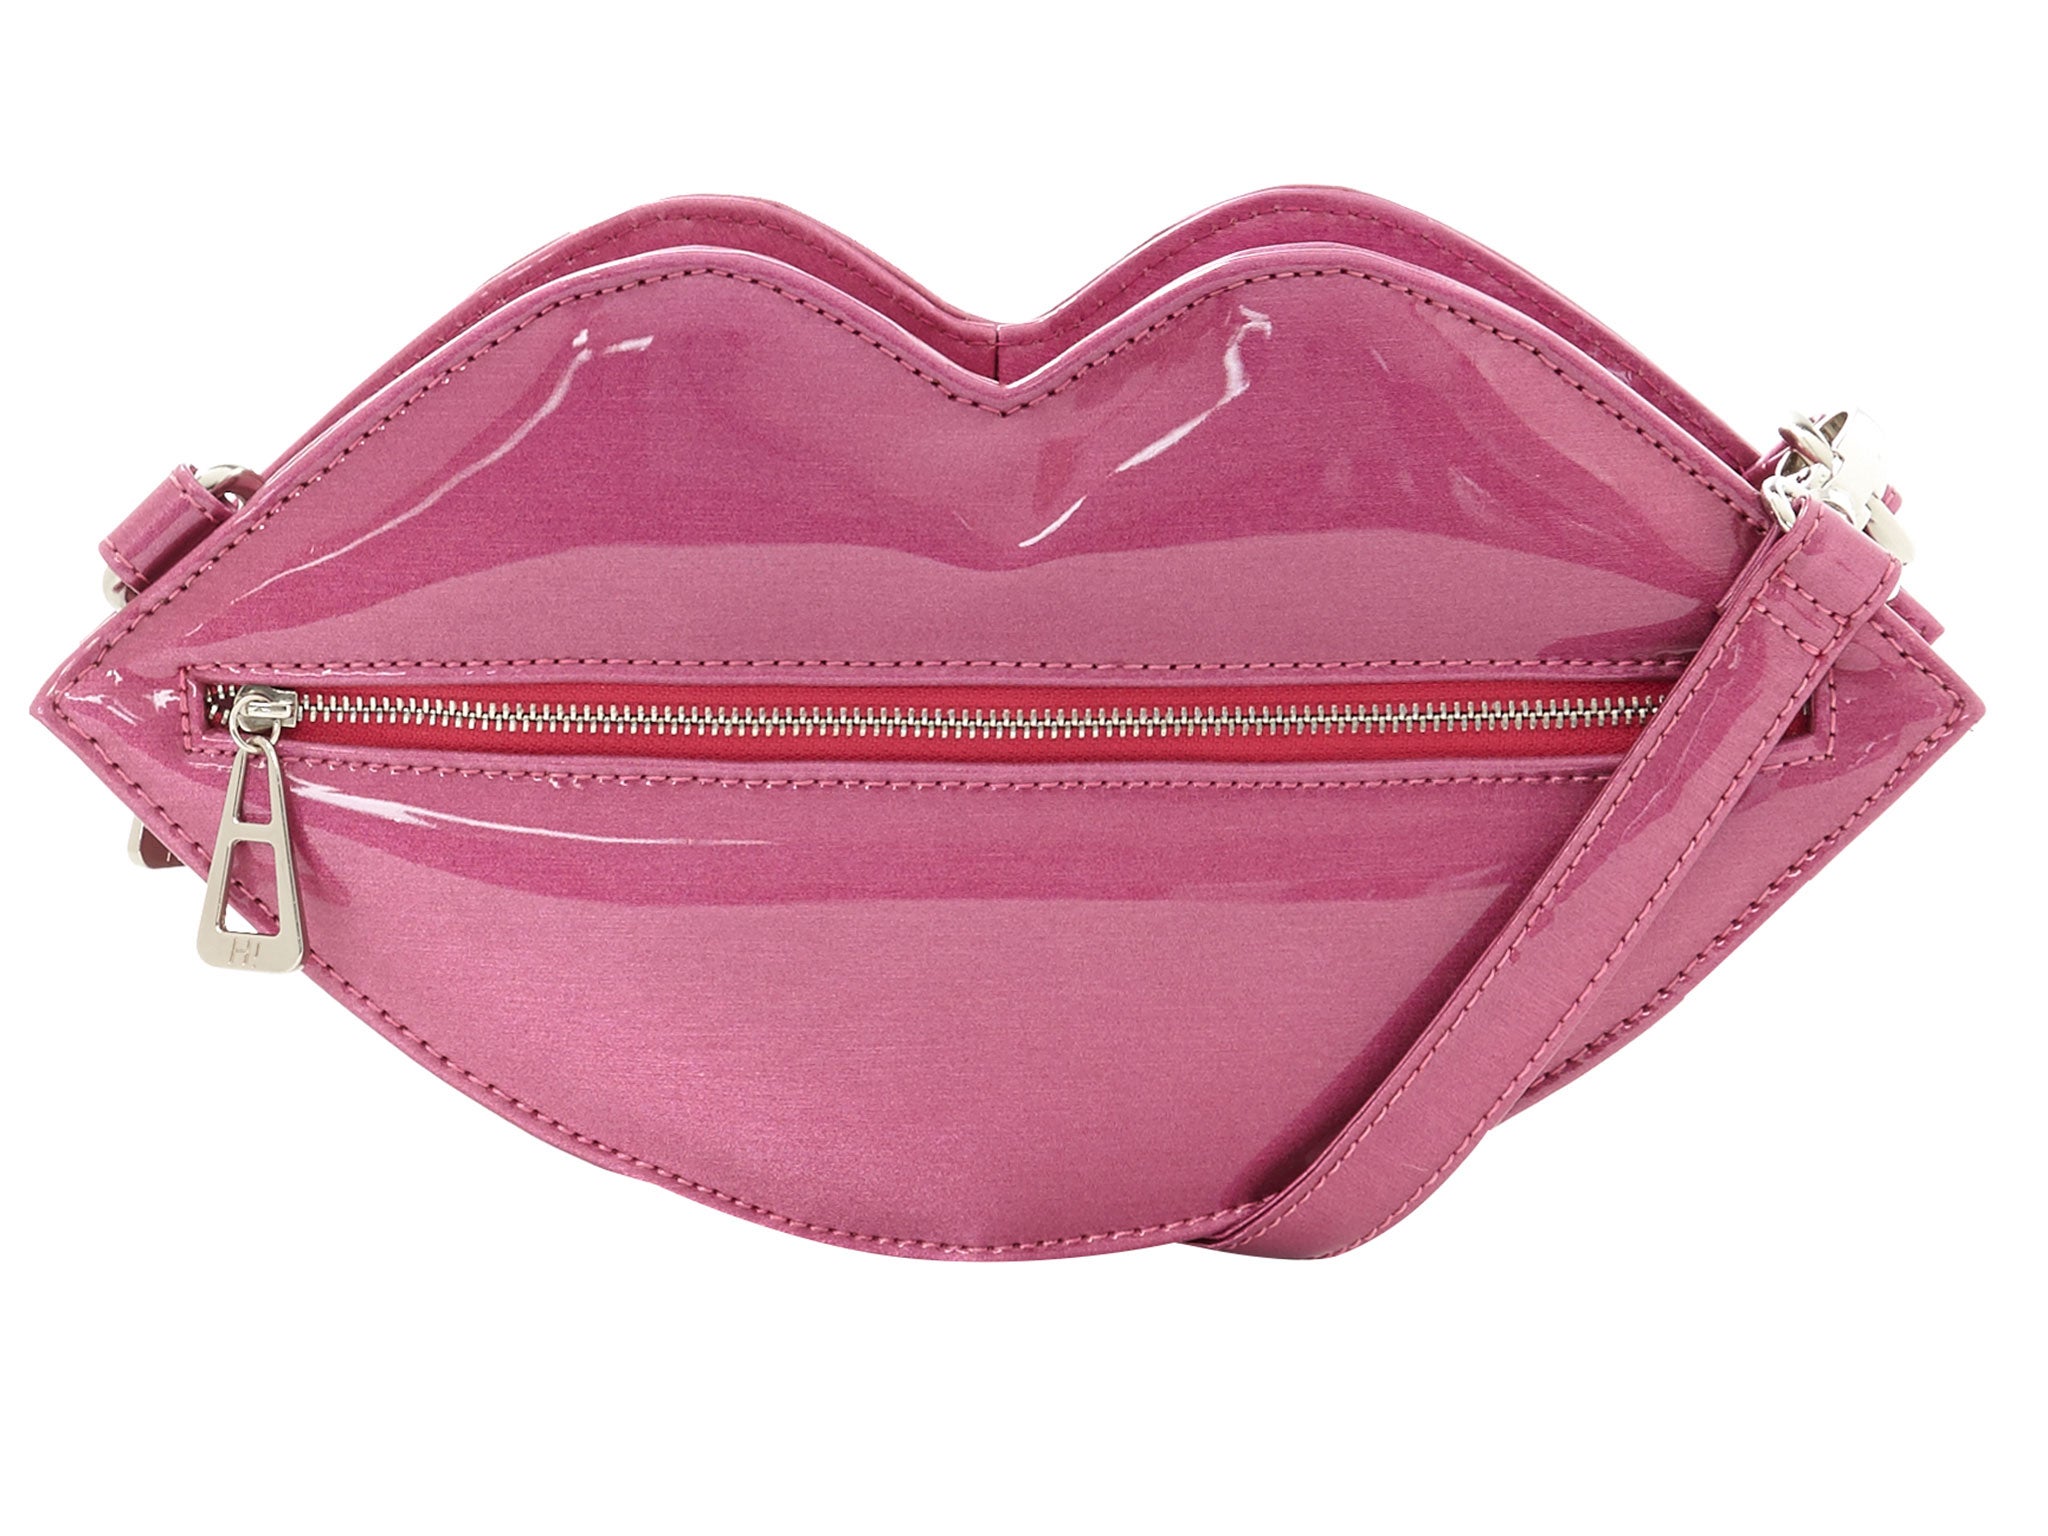 Debenhams H! By Henry Holland Lips Bag, £25 - Part of Debenhams' Think Pink range with a 25% donation, split 45% to Breakthrough Breast Cancer, 45% to Breast Cancer Campaign and 10% to Pink Ribbon Foundation